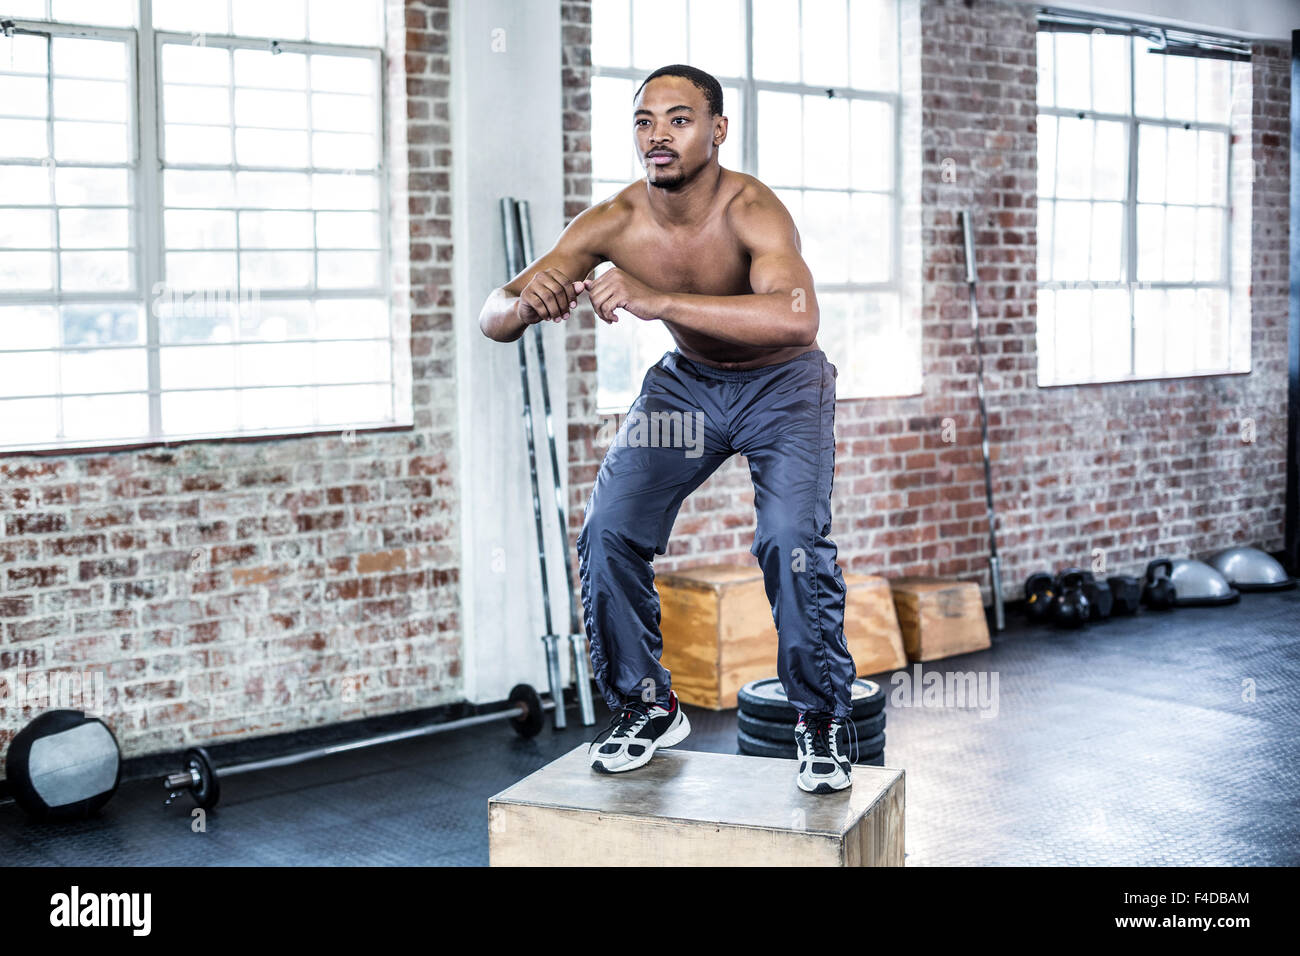 Fit man doing box jumps Stock Photo